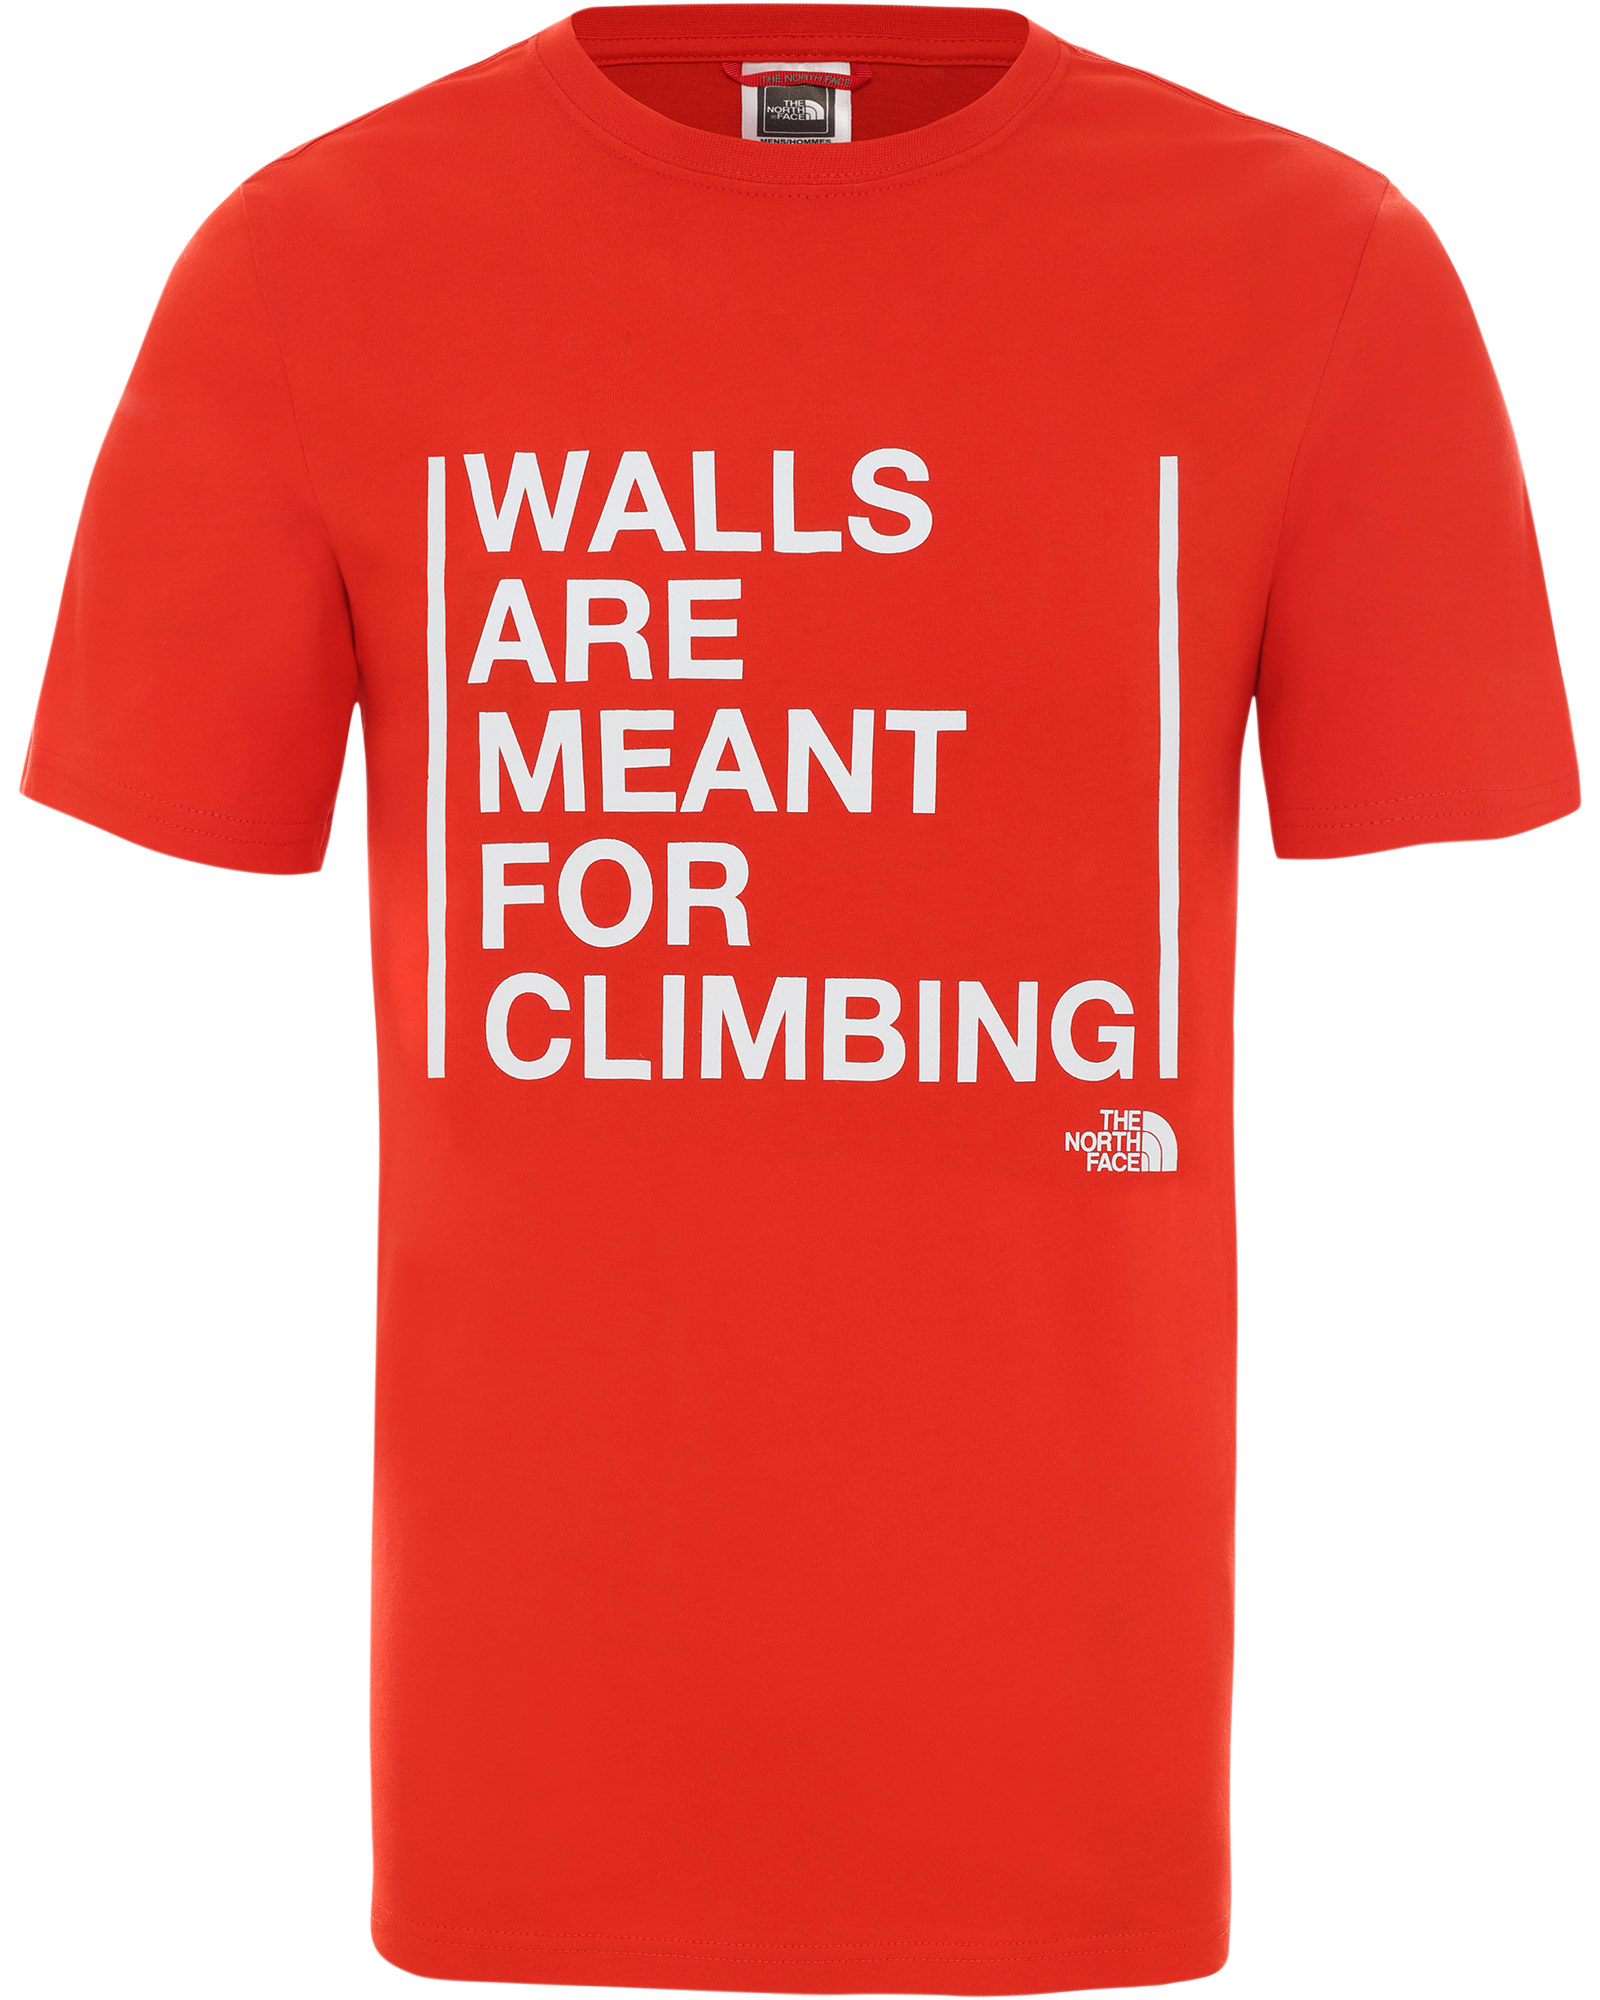 Product image of The North Face Walls Are For Climbing Men's T-Shirt